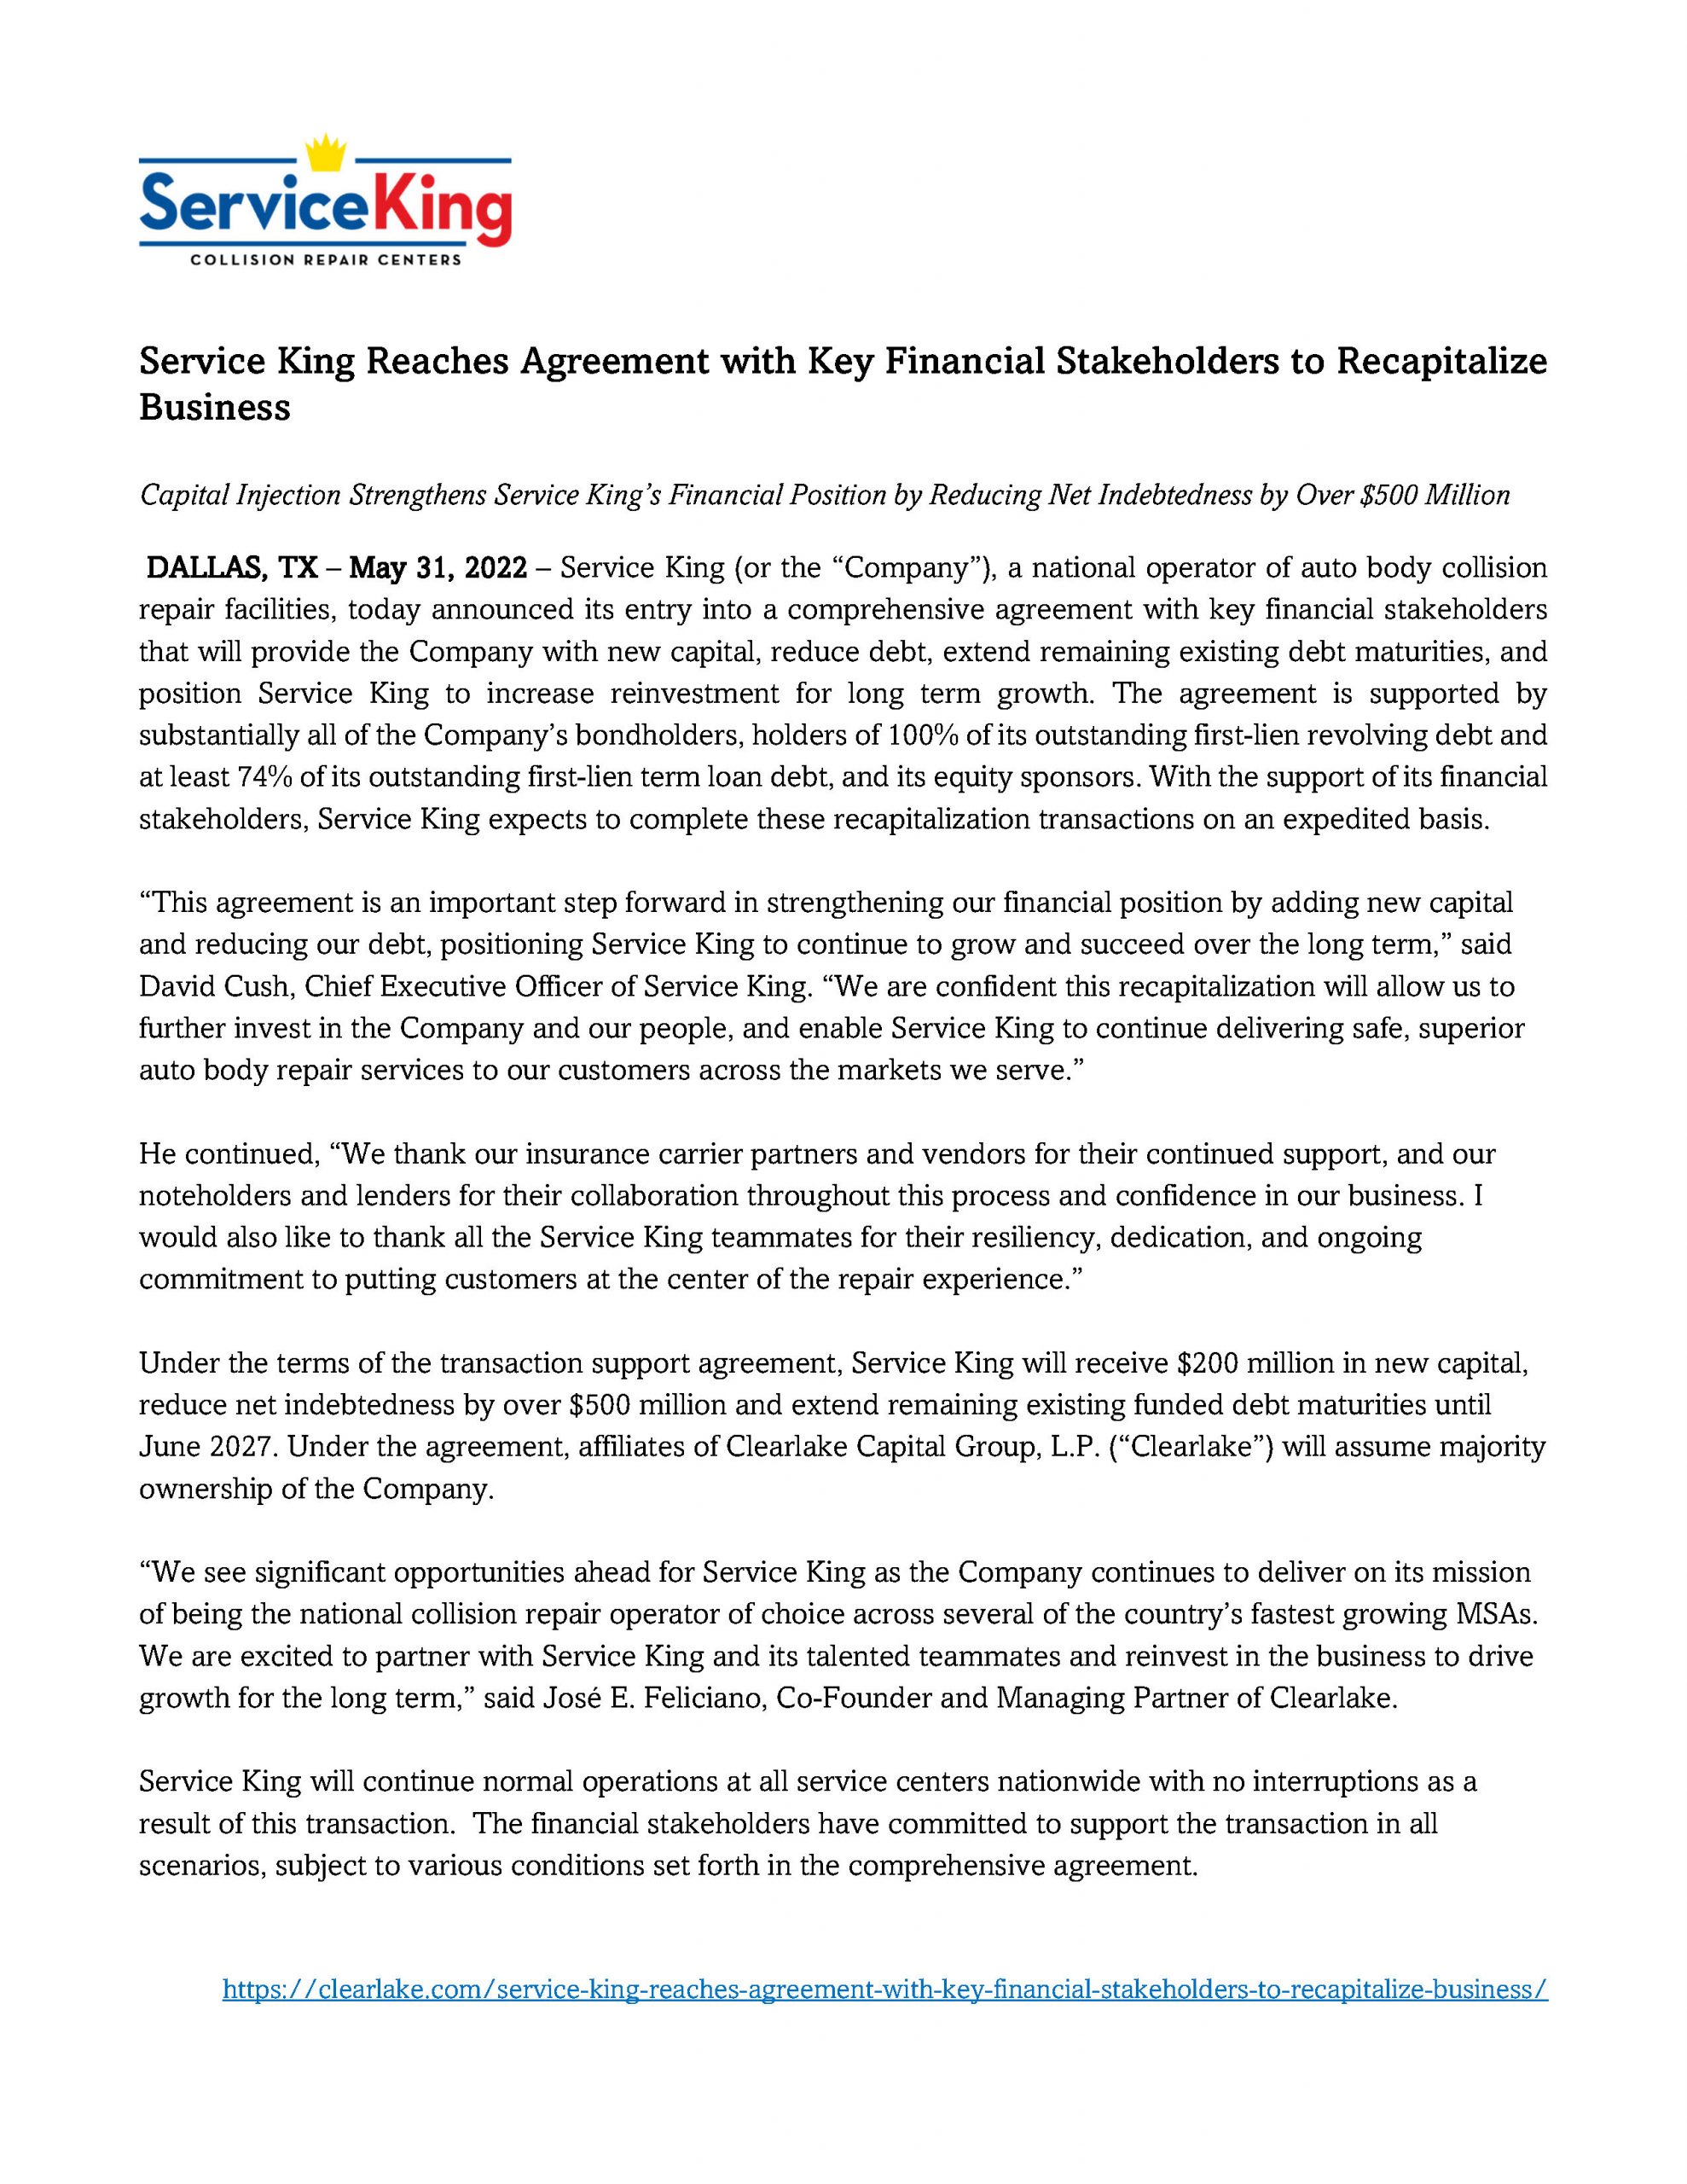 Service King Reaches Agreement with Key Financial Stakeholders to Recapitalize Business 5.31.2022